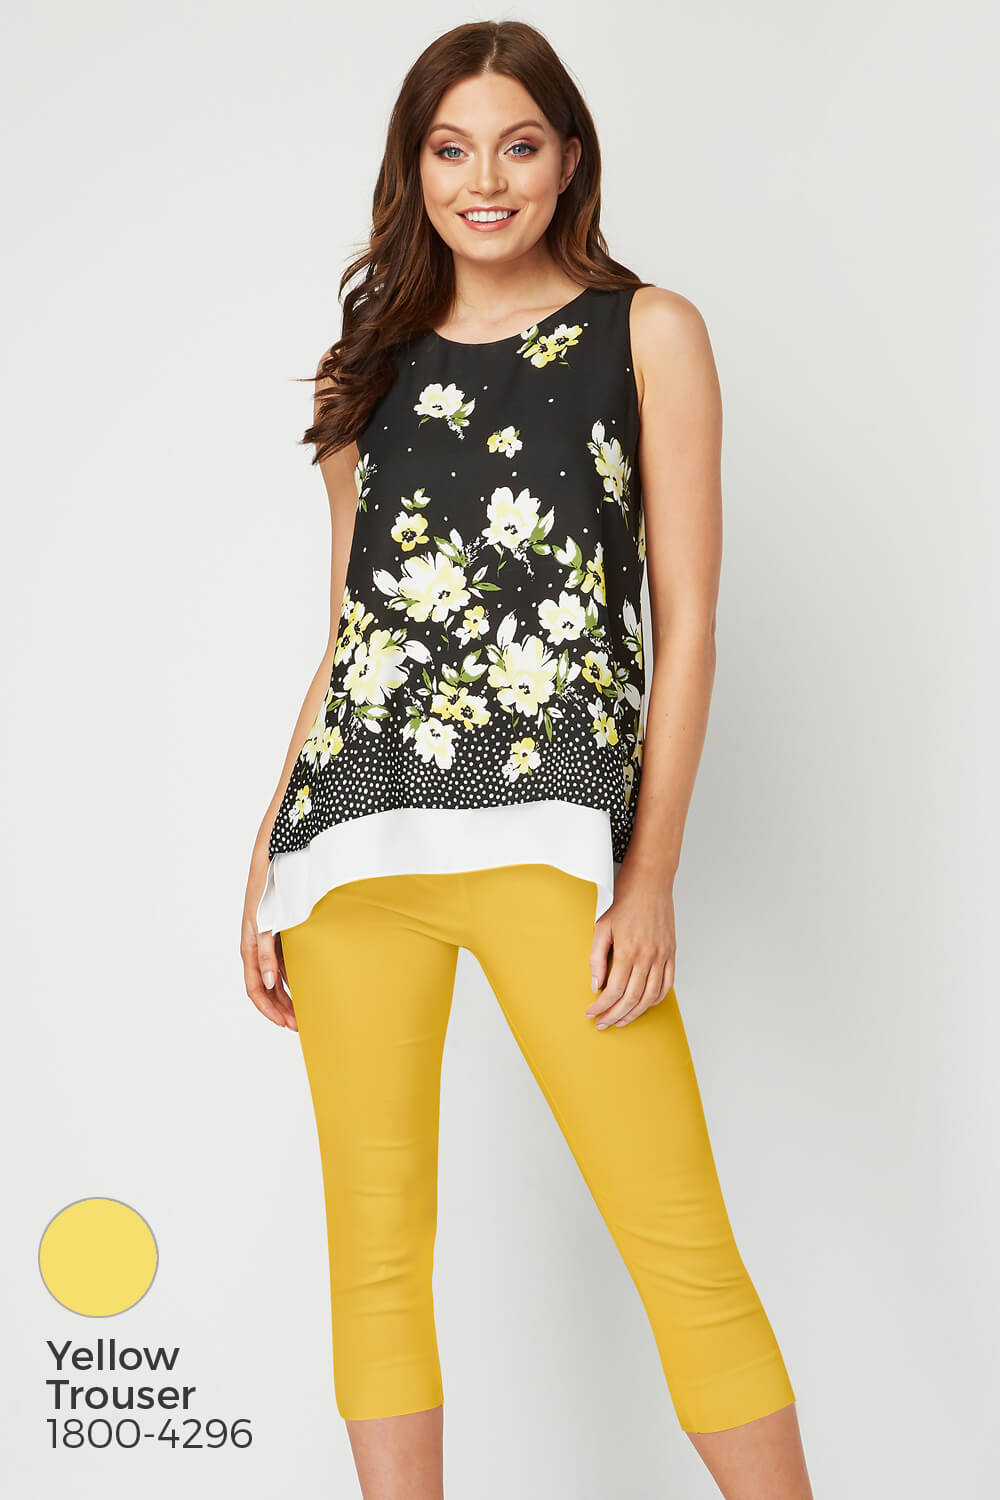 Black Floral Print Overlay Top, Image 8 of 8